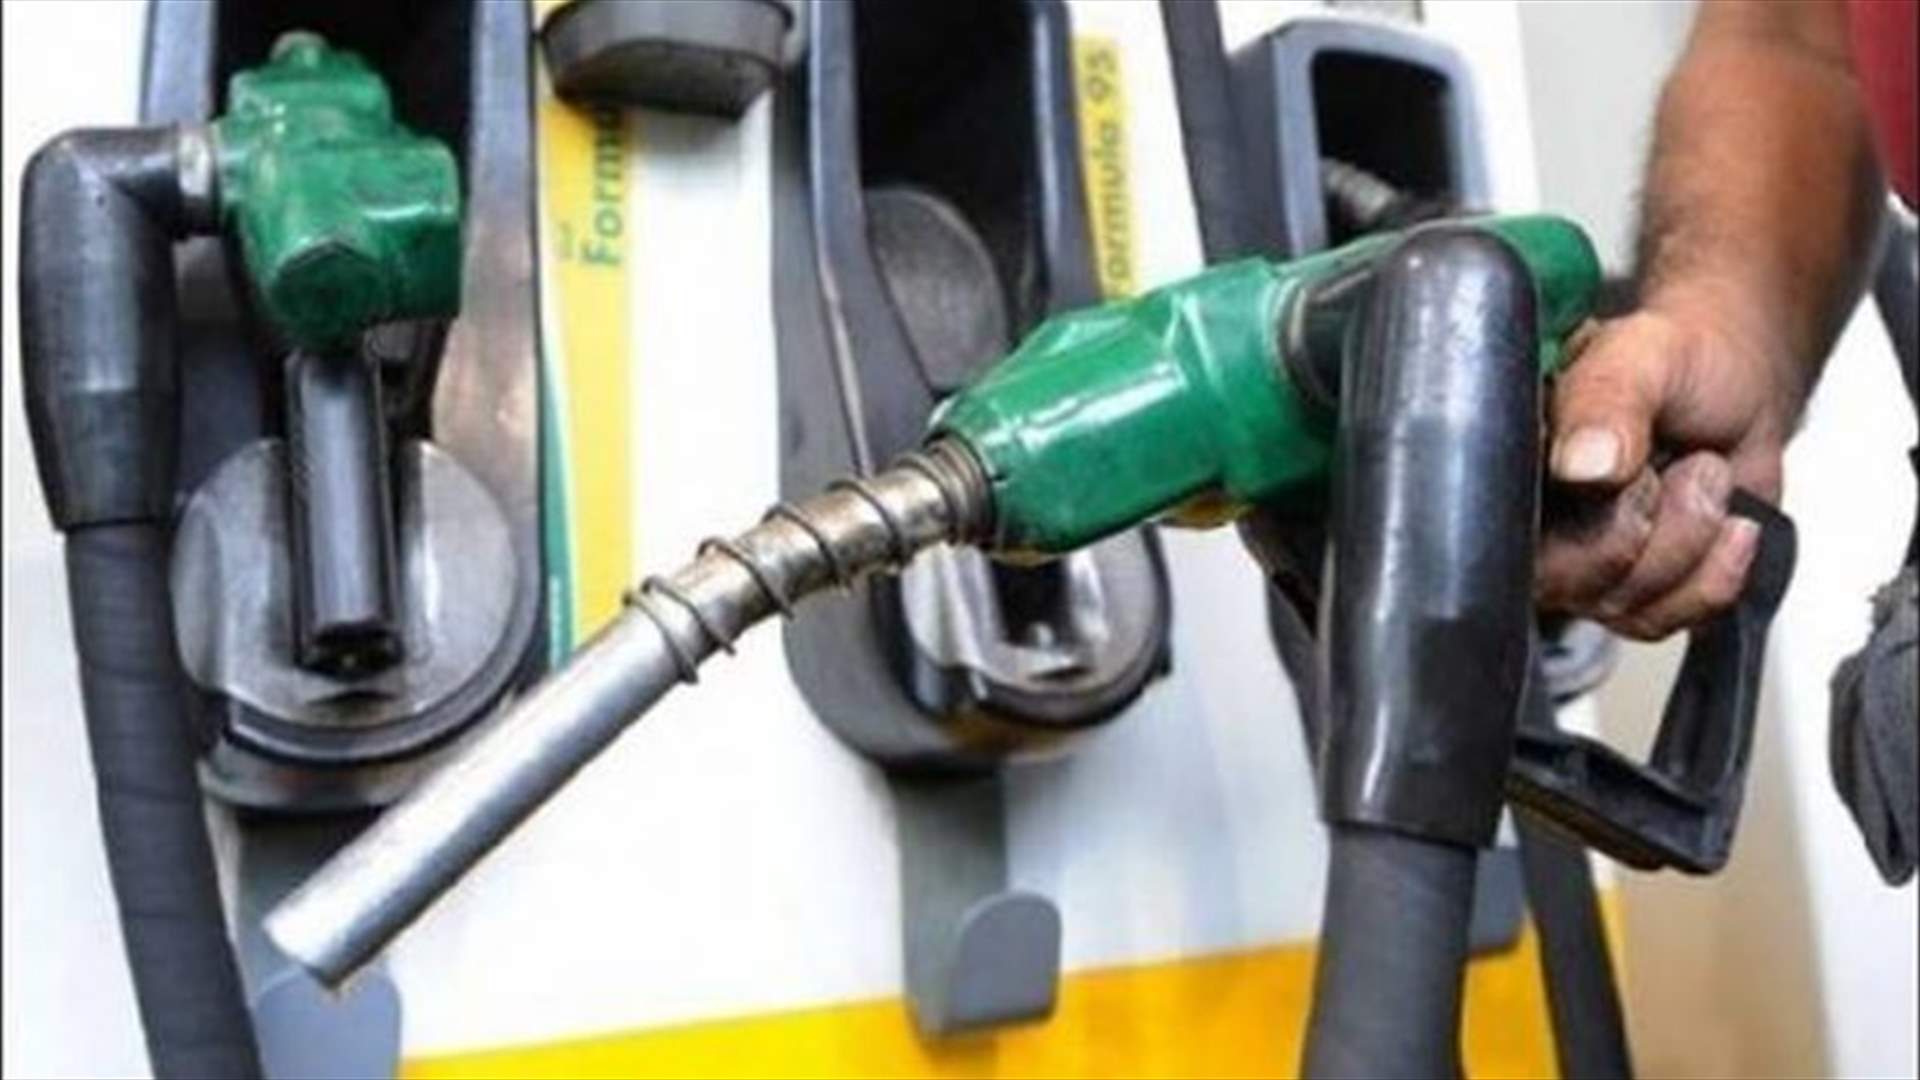 Lebanon fuel prices witness further drop